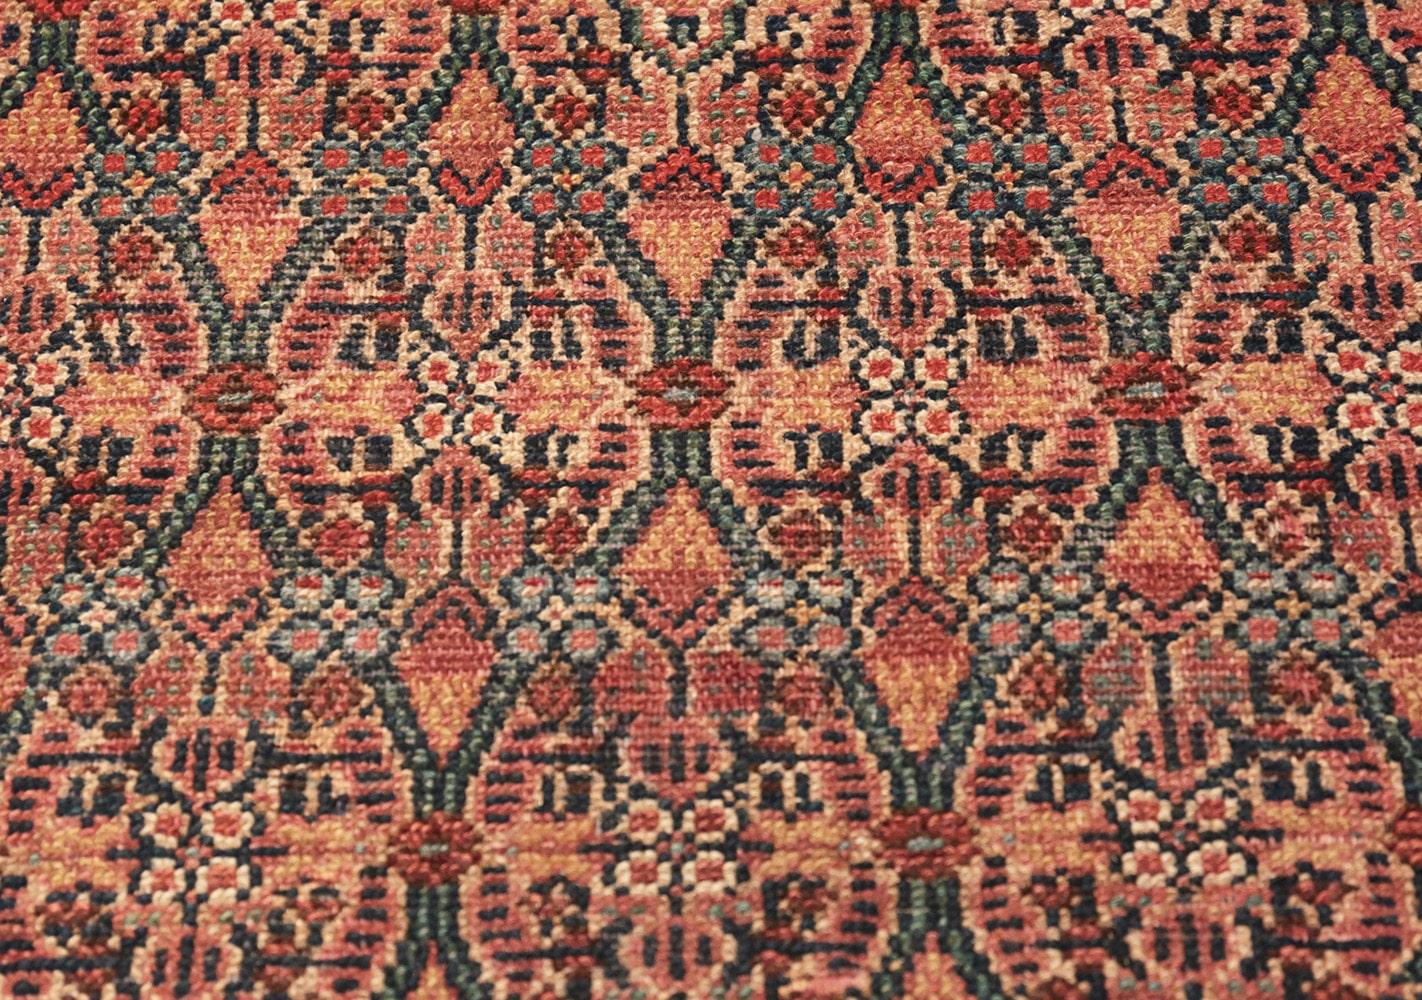 Antique Serab runner rug, country of origin: Persia, circa late 19th century. Size: 3 ft 6 in x 15 ft 9 in (1.07 m x 4.8 m).

